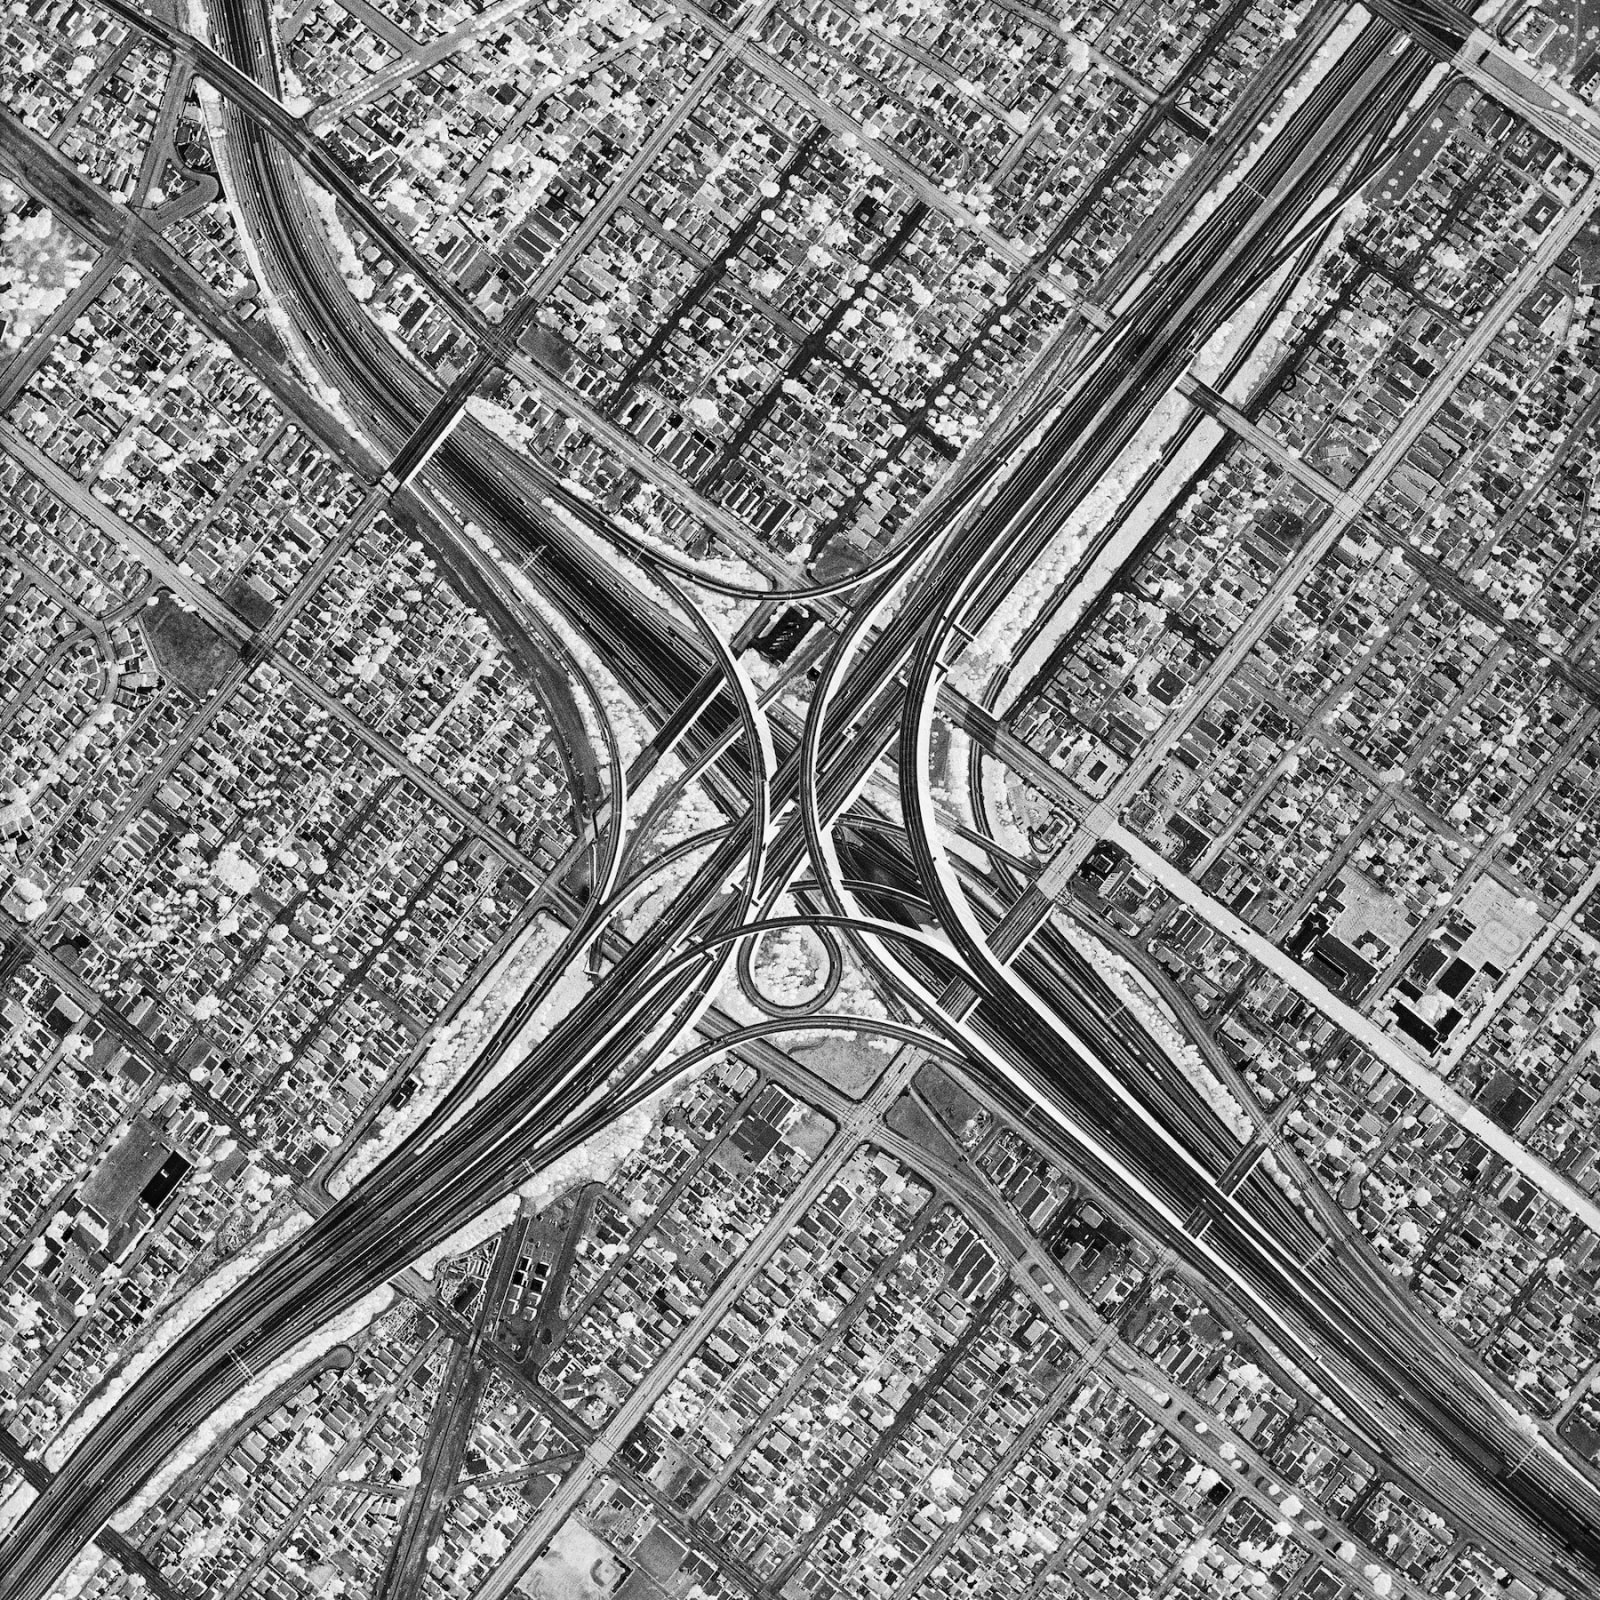 black and white aerial photograph of dense urban grid and freeways in Los Angeles, by David Maisel